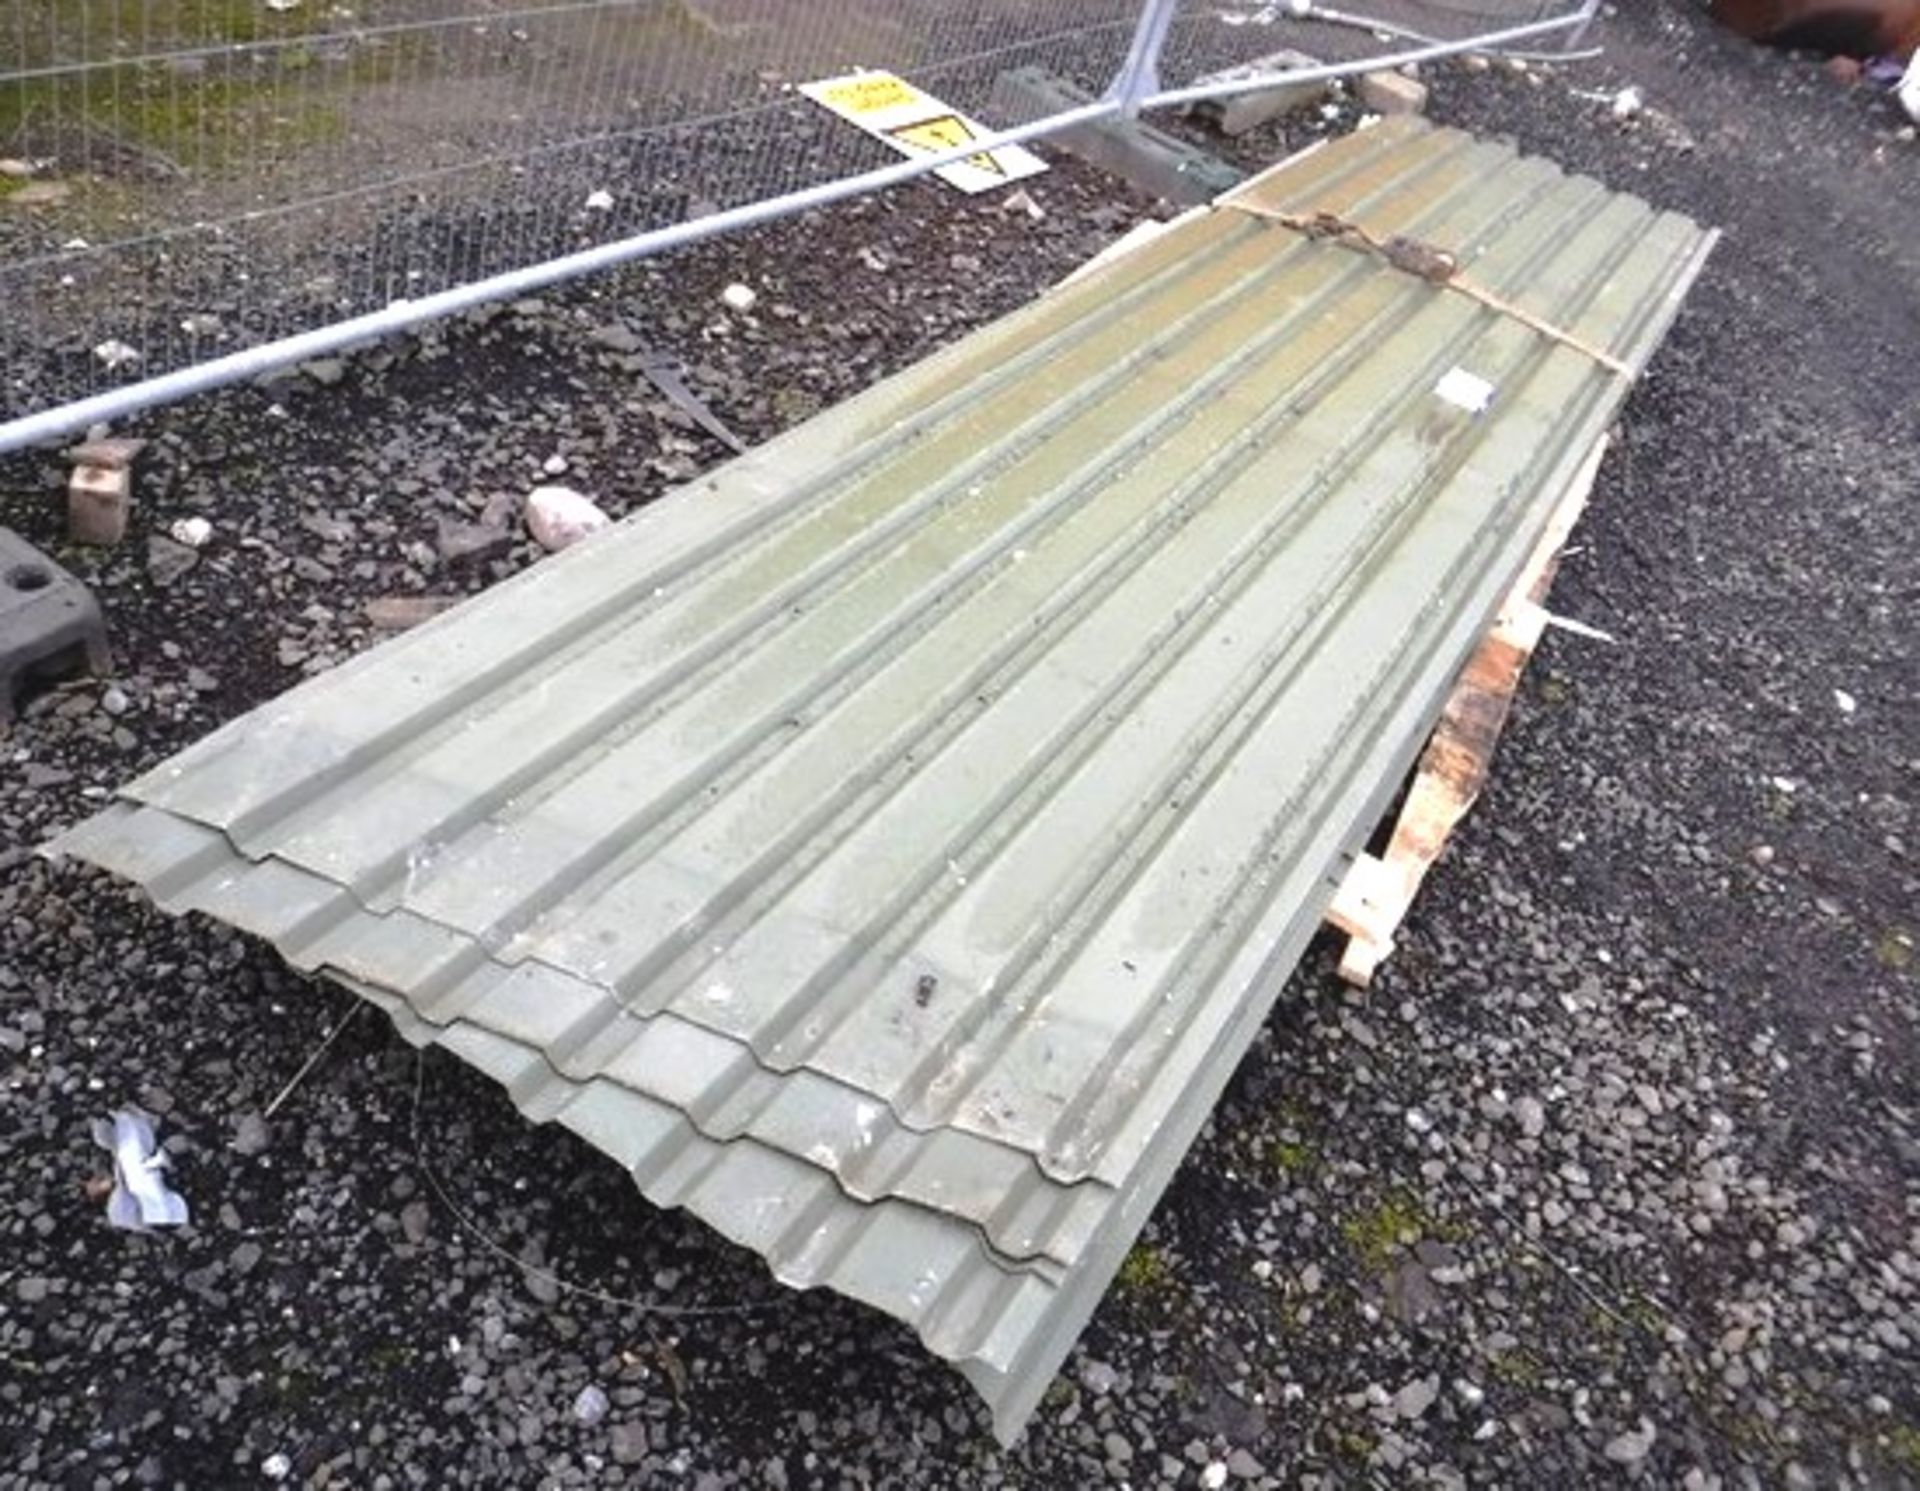 SELECTION OF STEEL CLADDING FOR SHEDS/BUILDINGS. APPROX 50 SHEETS 15' X 3' 7"